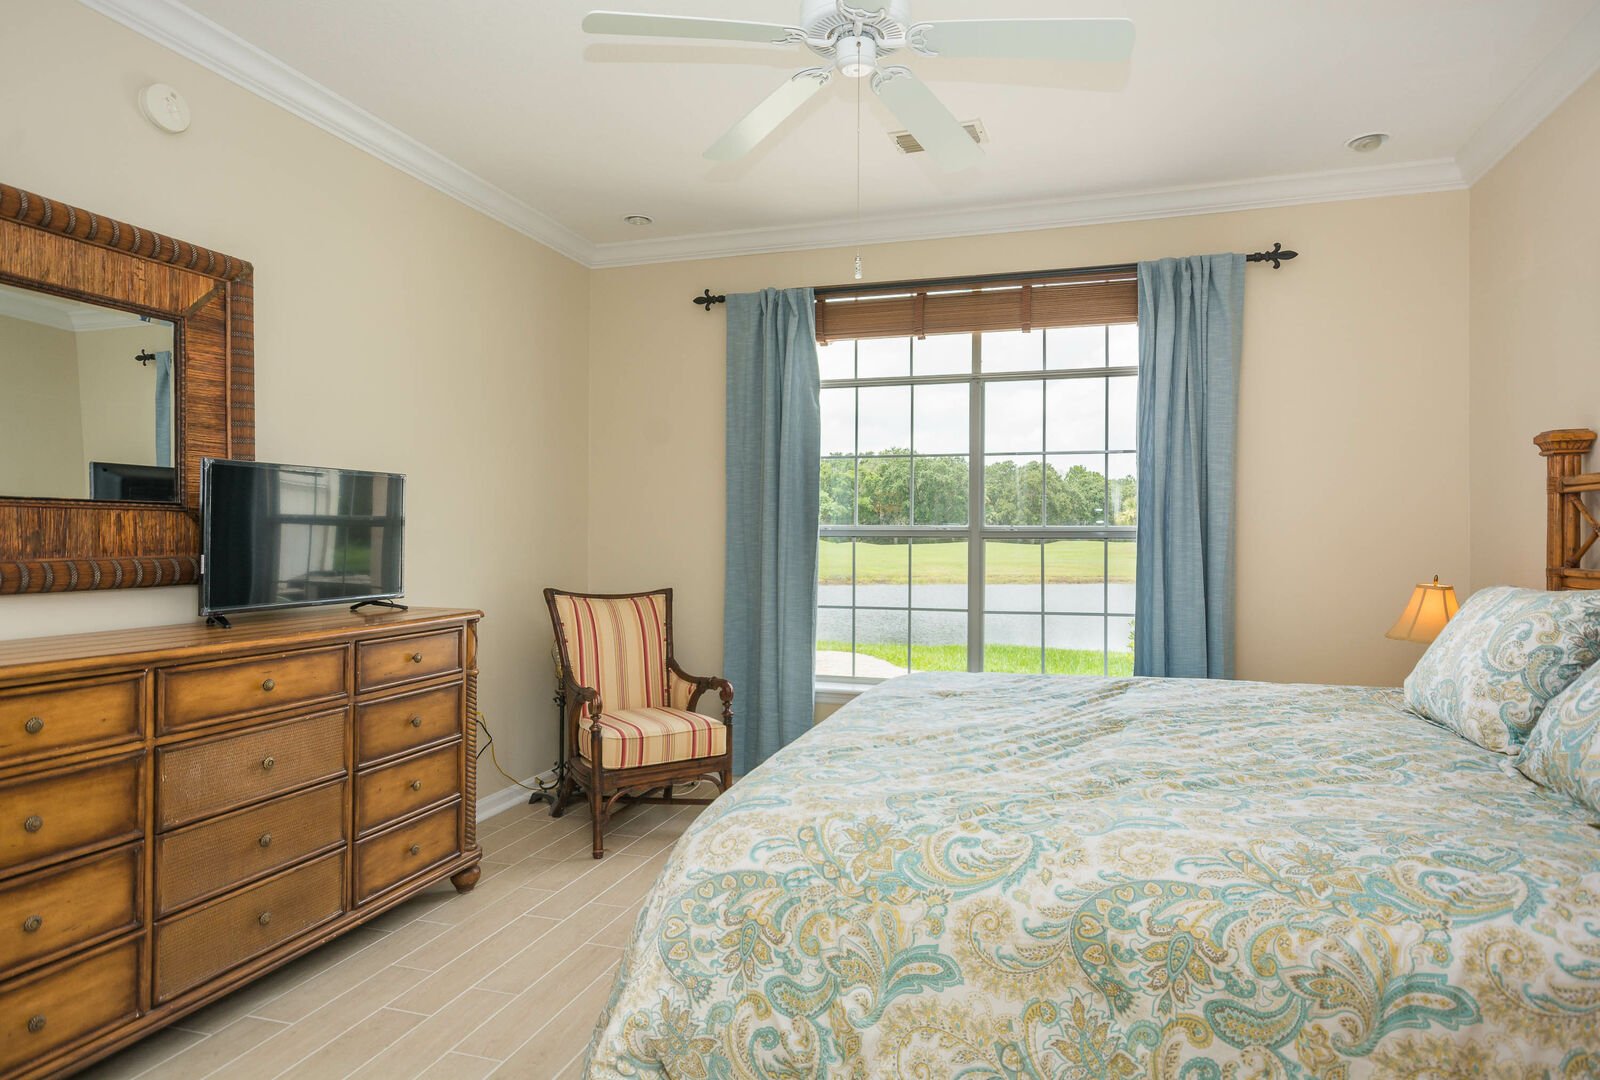 A flat-screen TV on the dresser in front of the bed, and large windows with a view of the pond and golf course.